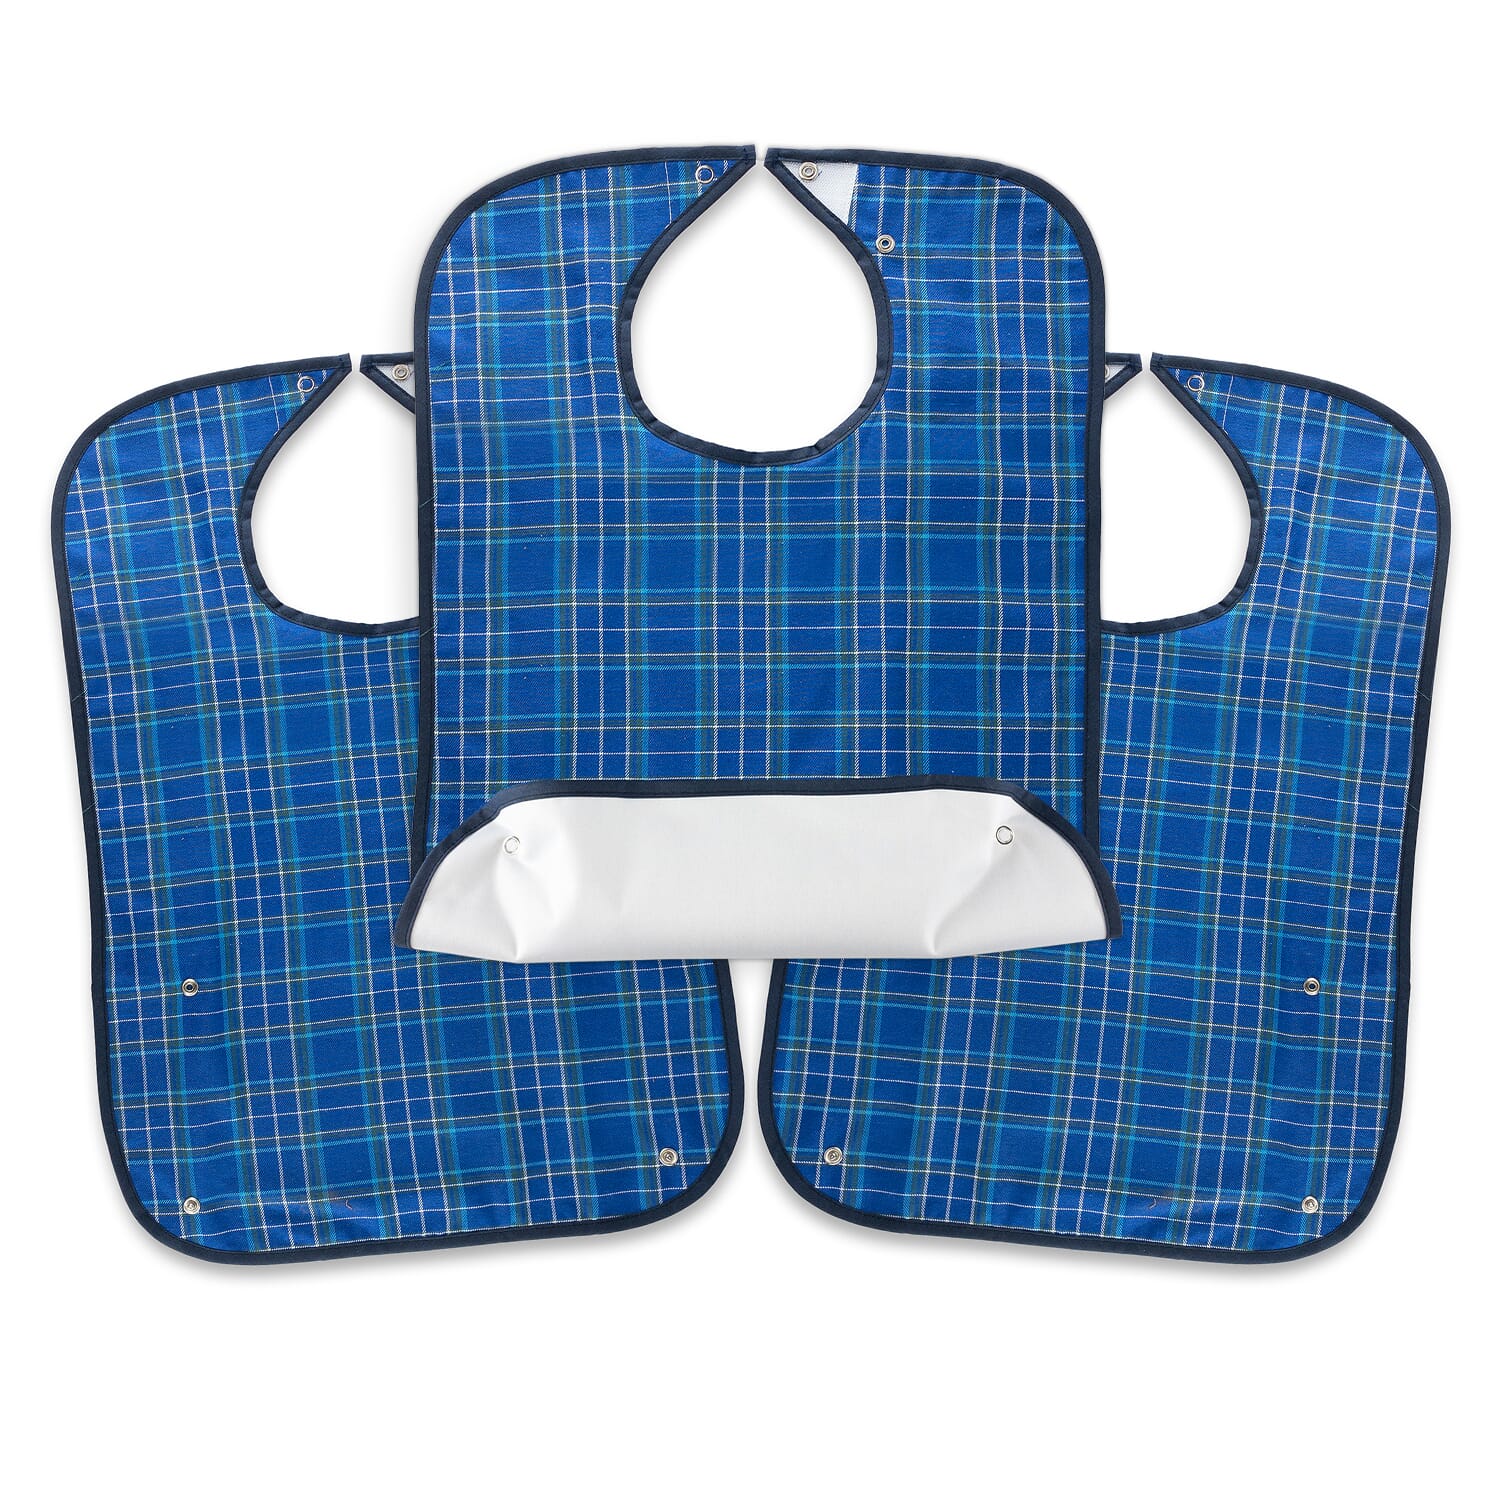 View Everyday Bib Small Blue Pack of 3 information